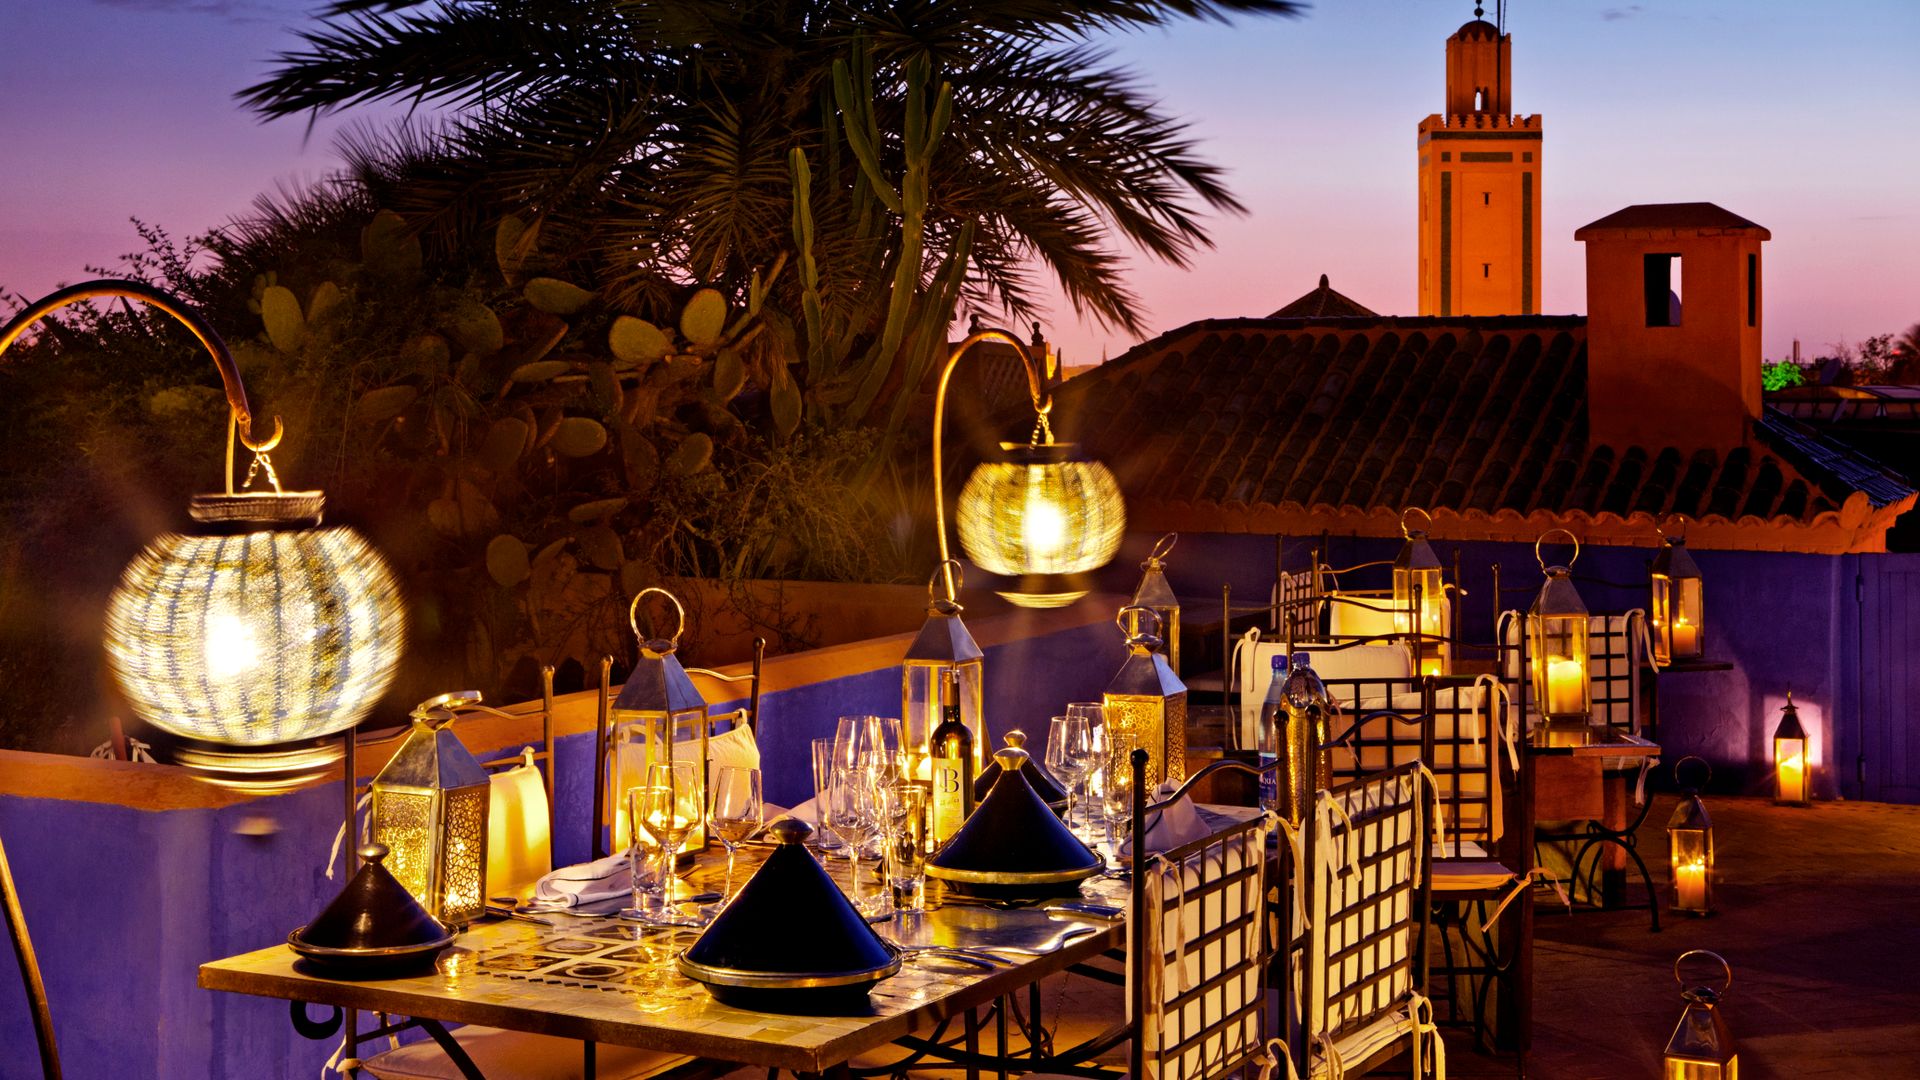 Le Farnatchi roof terrace featured in Riads of Marrakech' by Elan Fleisher